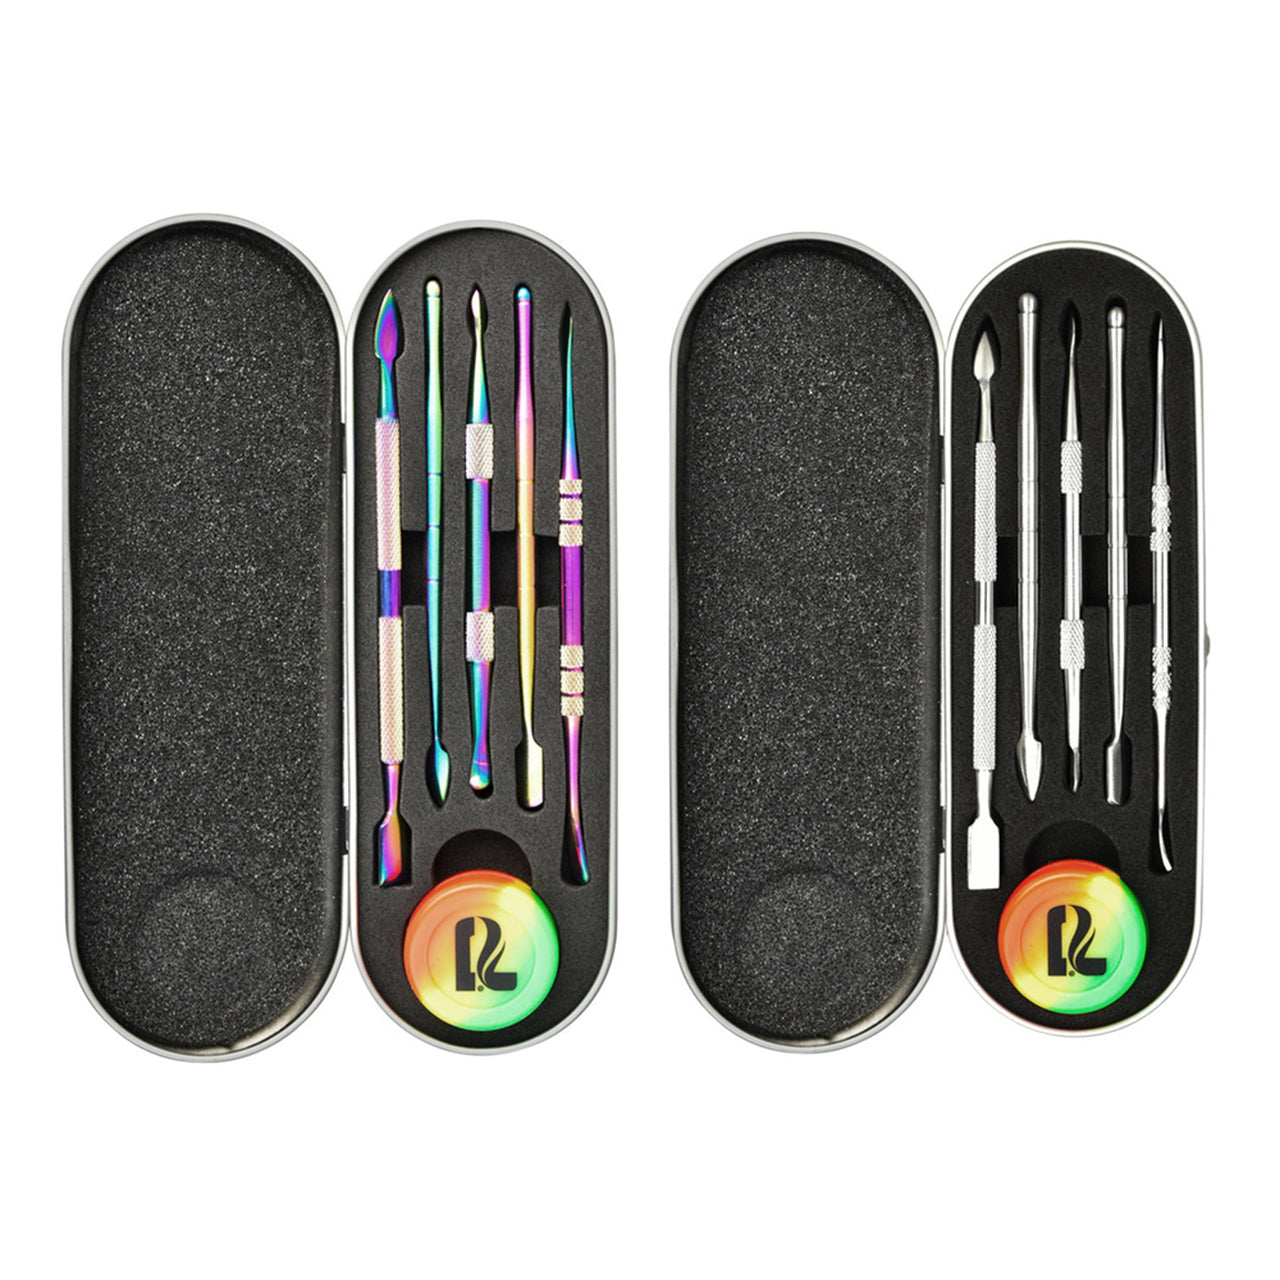 Rainbow Stainless Steel Dab Tool Kit with Silicone Jar